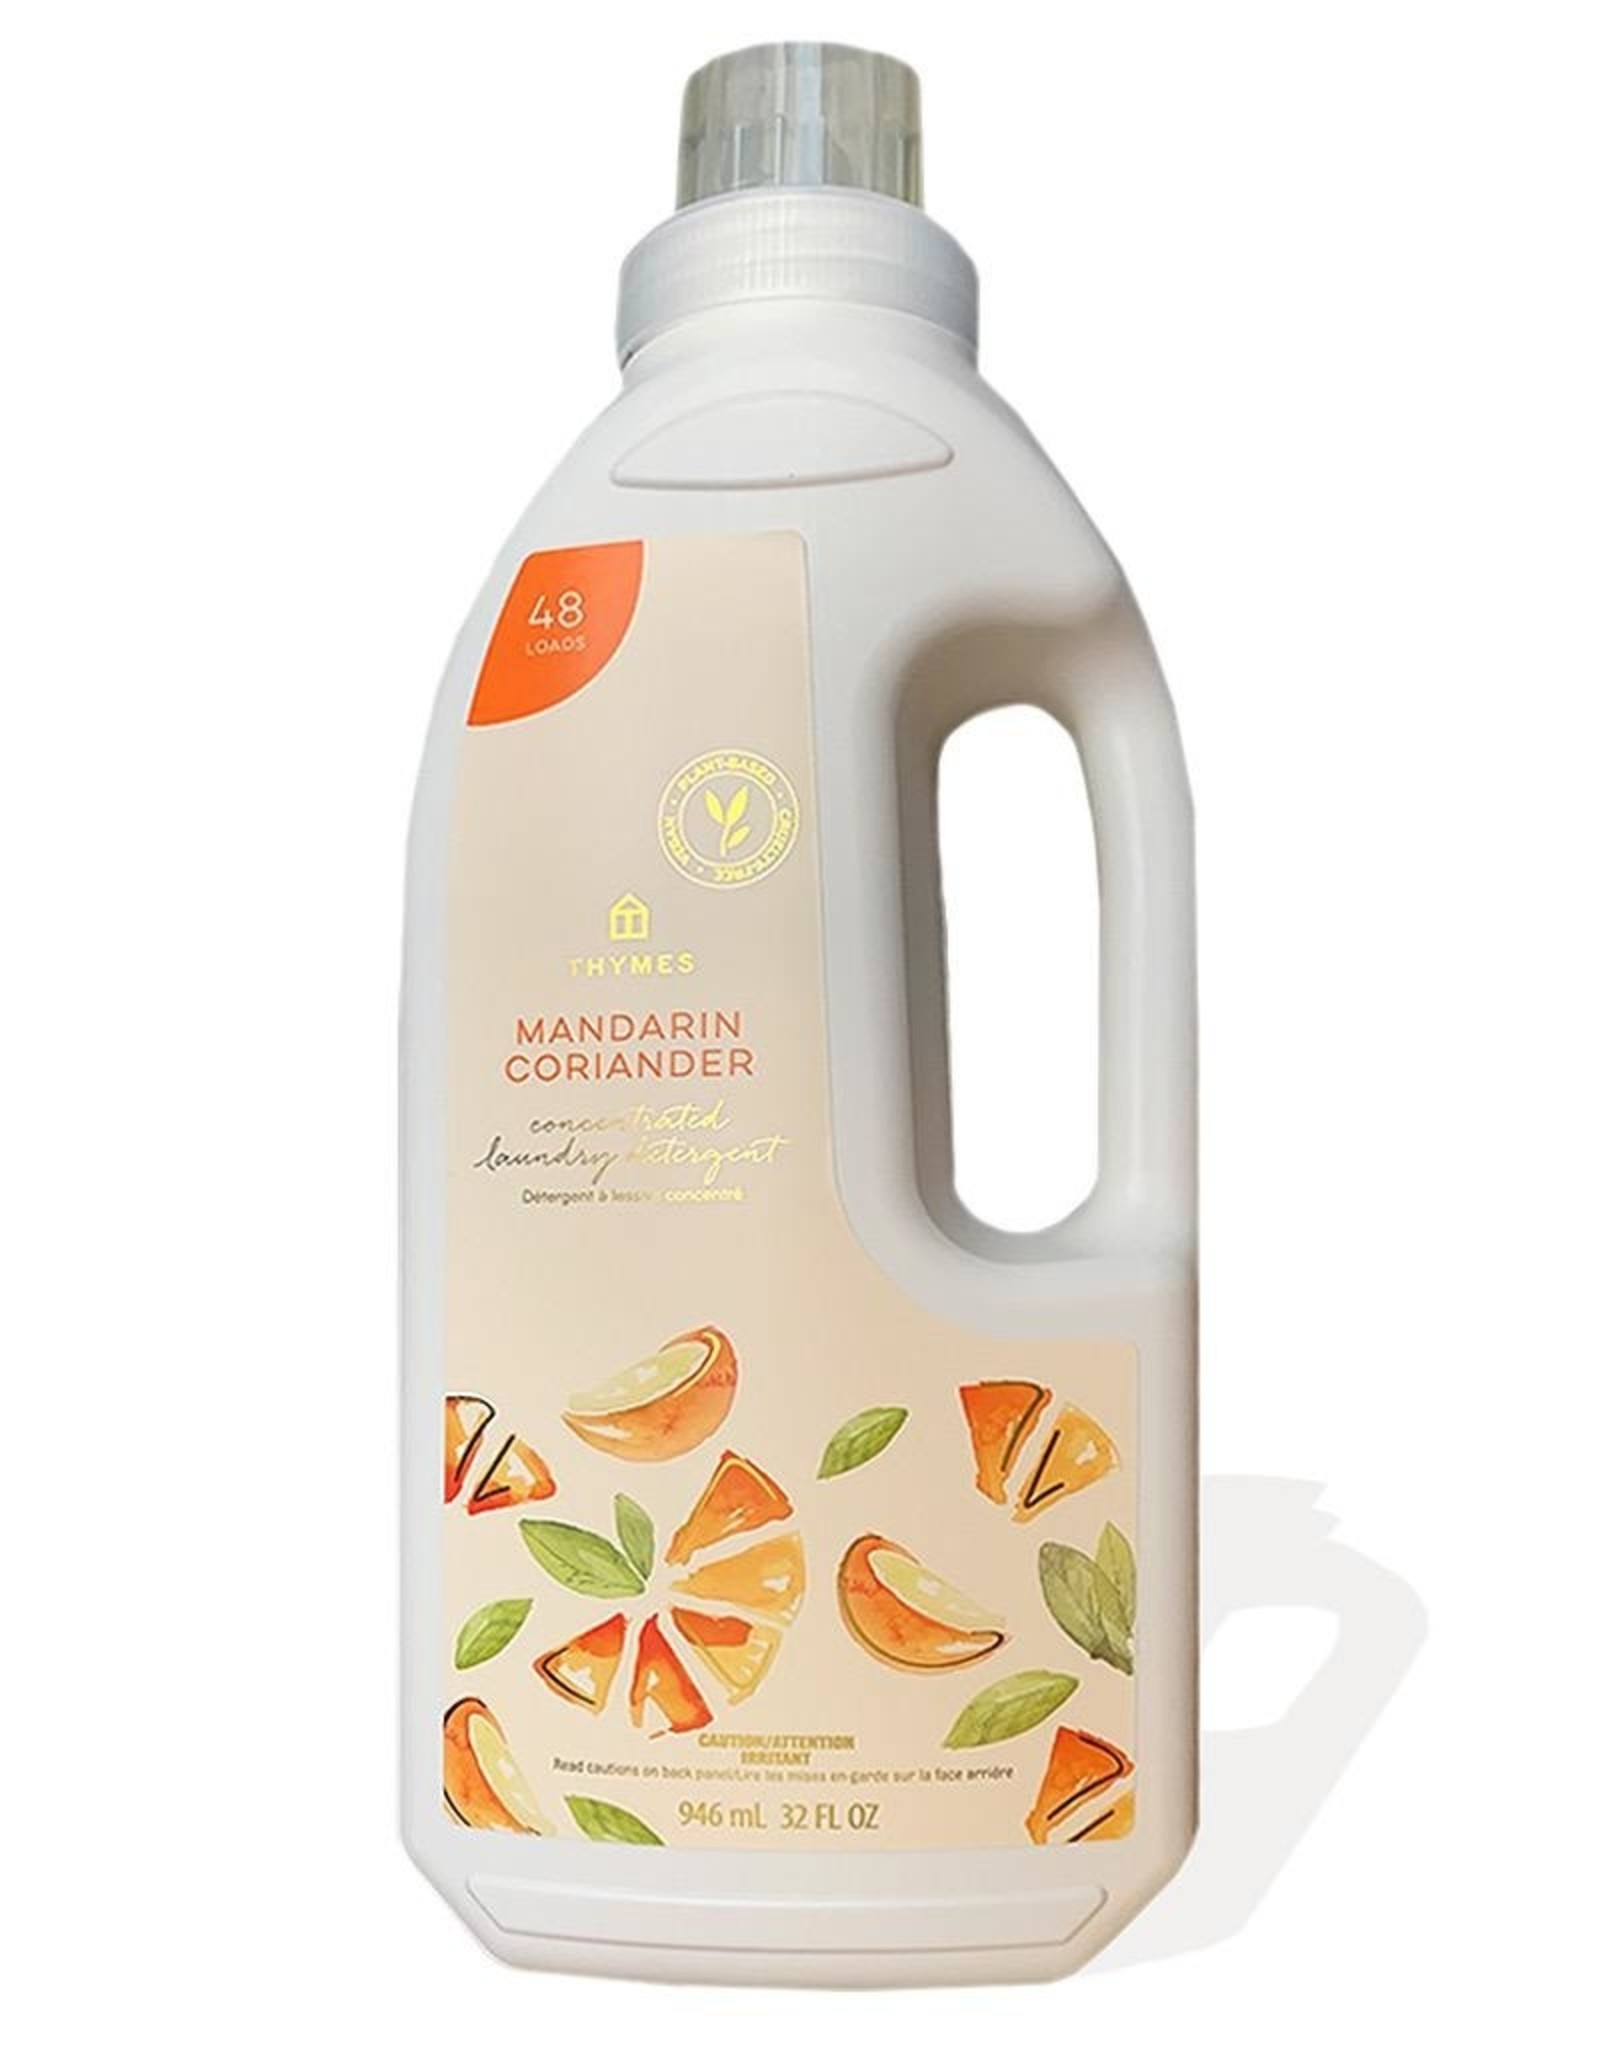 Mandarin Coriander Concentrated Laundry Detergent 32 Oz